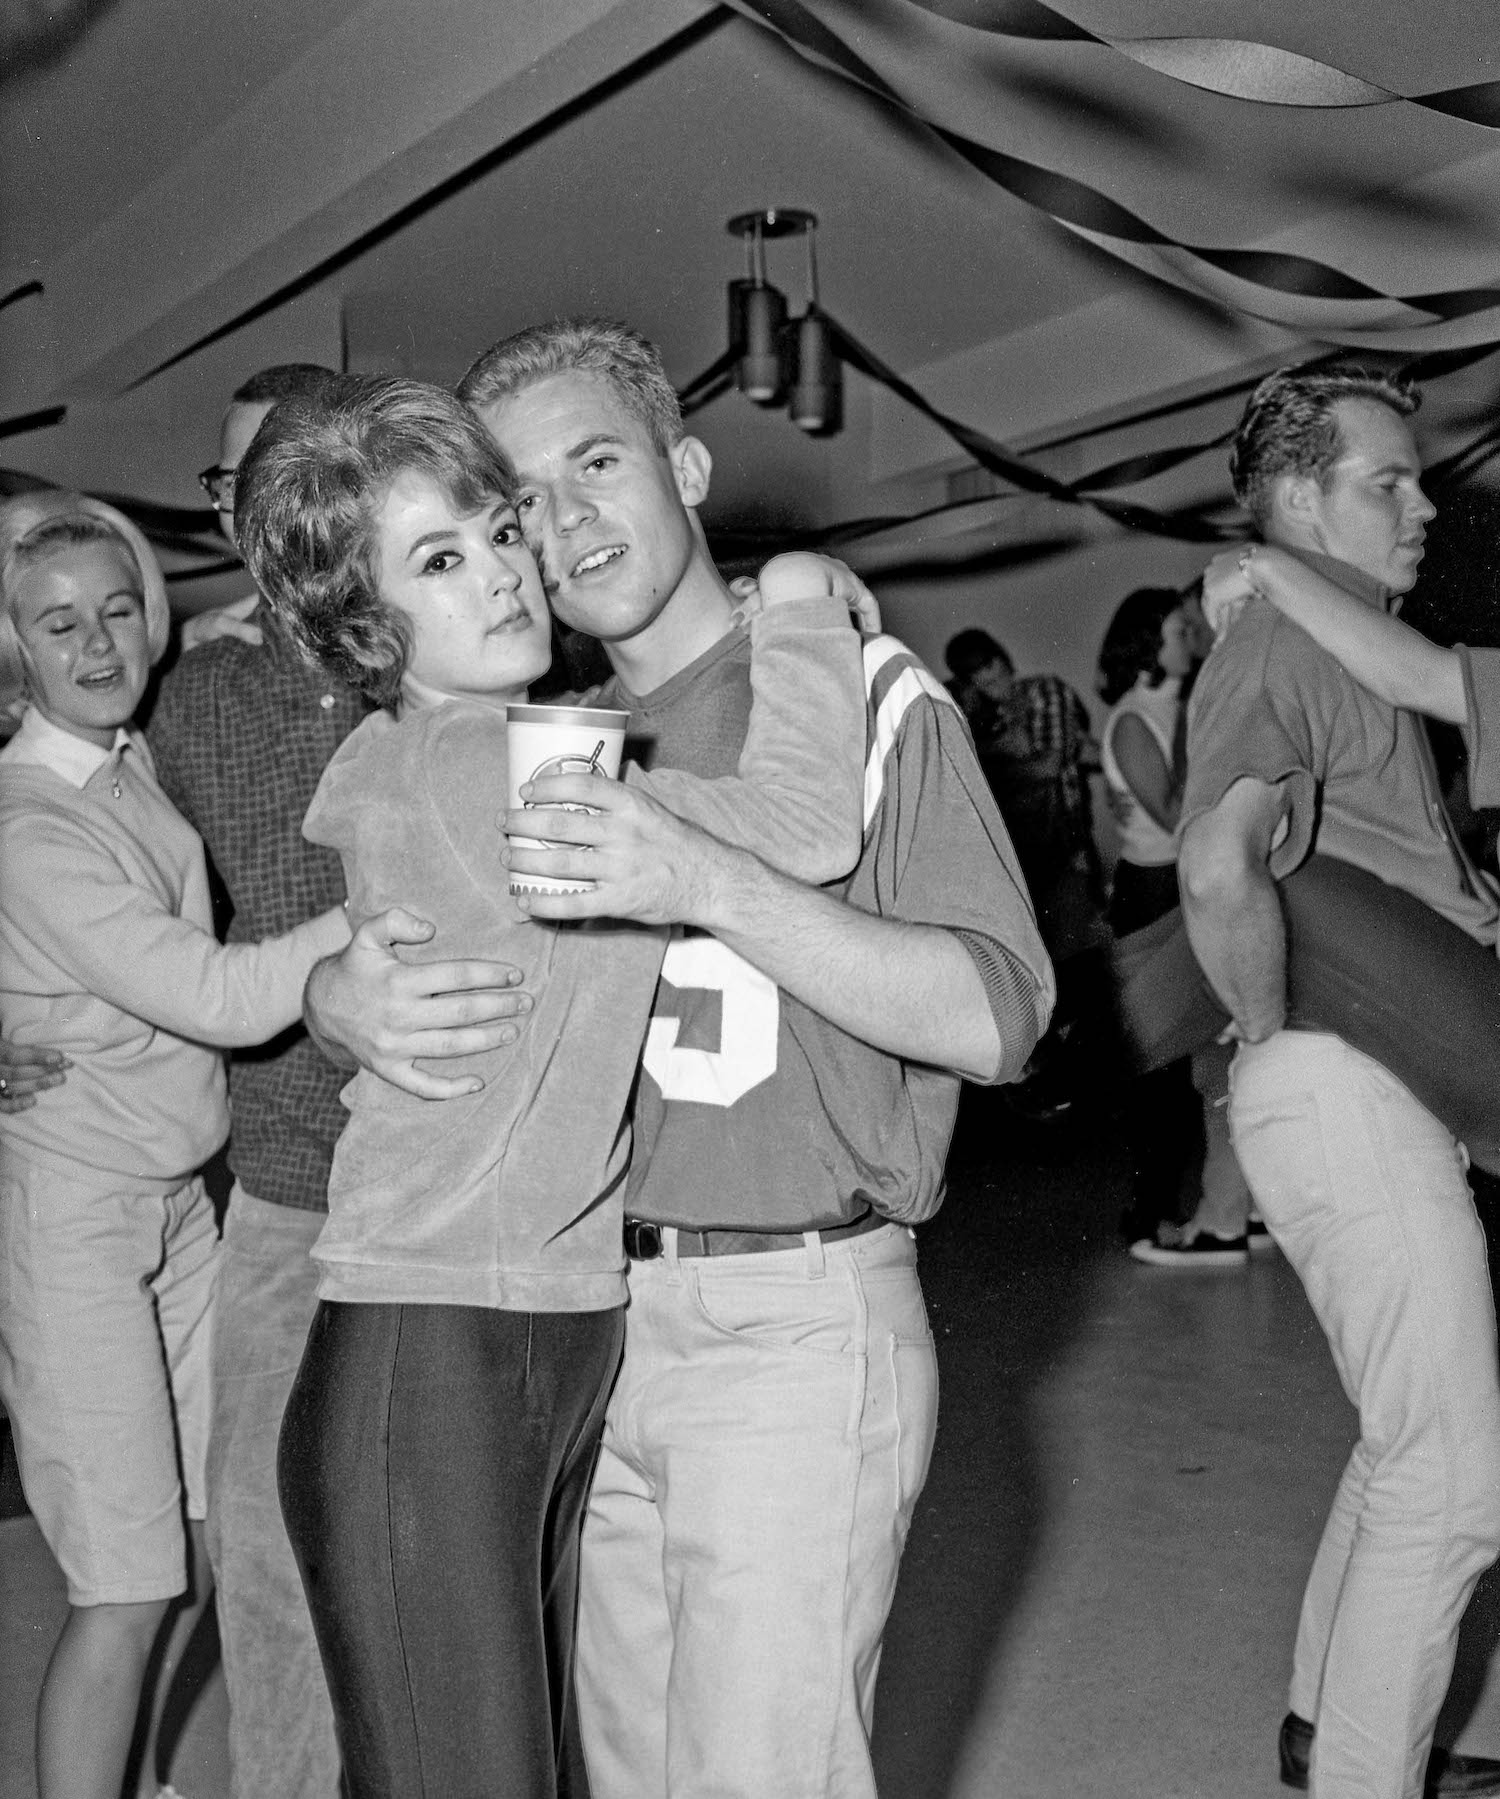 Oct 31st, 1964--Halloween Dance Party, Fresno State College